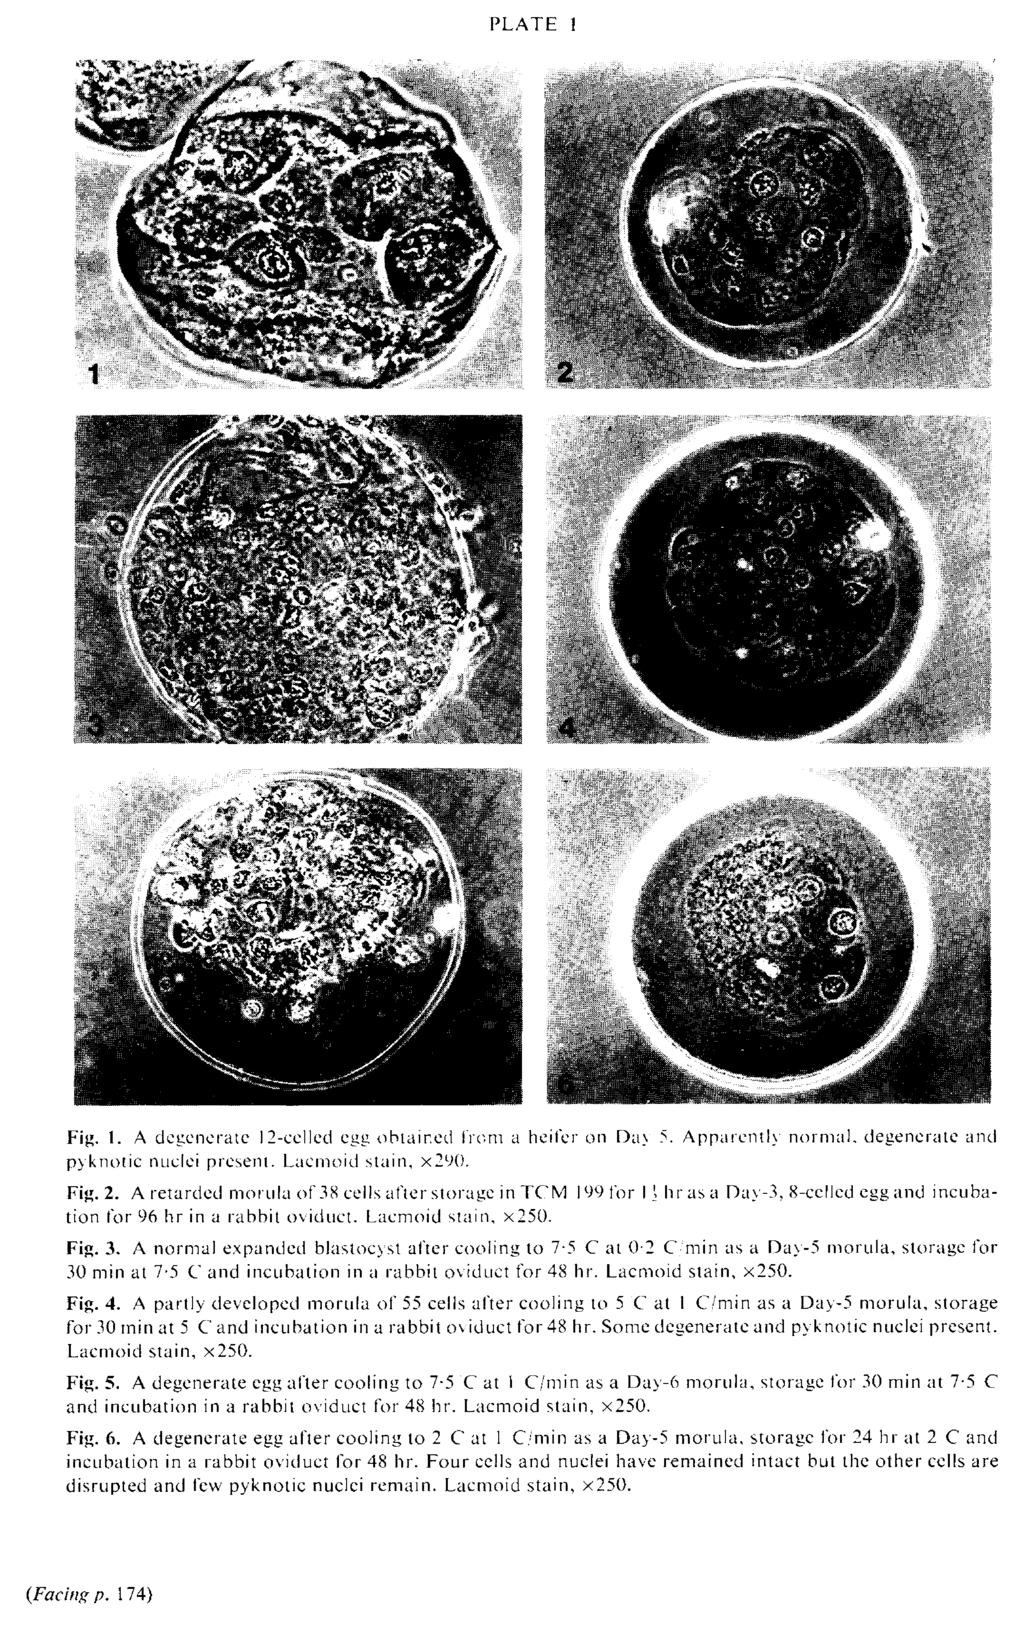 PLATE 1 Fig. 1. A degenerate 12-celled egg obtained from a heifer on Day 5. Apparently normal, degenerate and pyknotic nuclei present. Lacmoid stain, x290. Fig. 2.